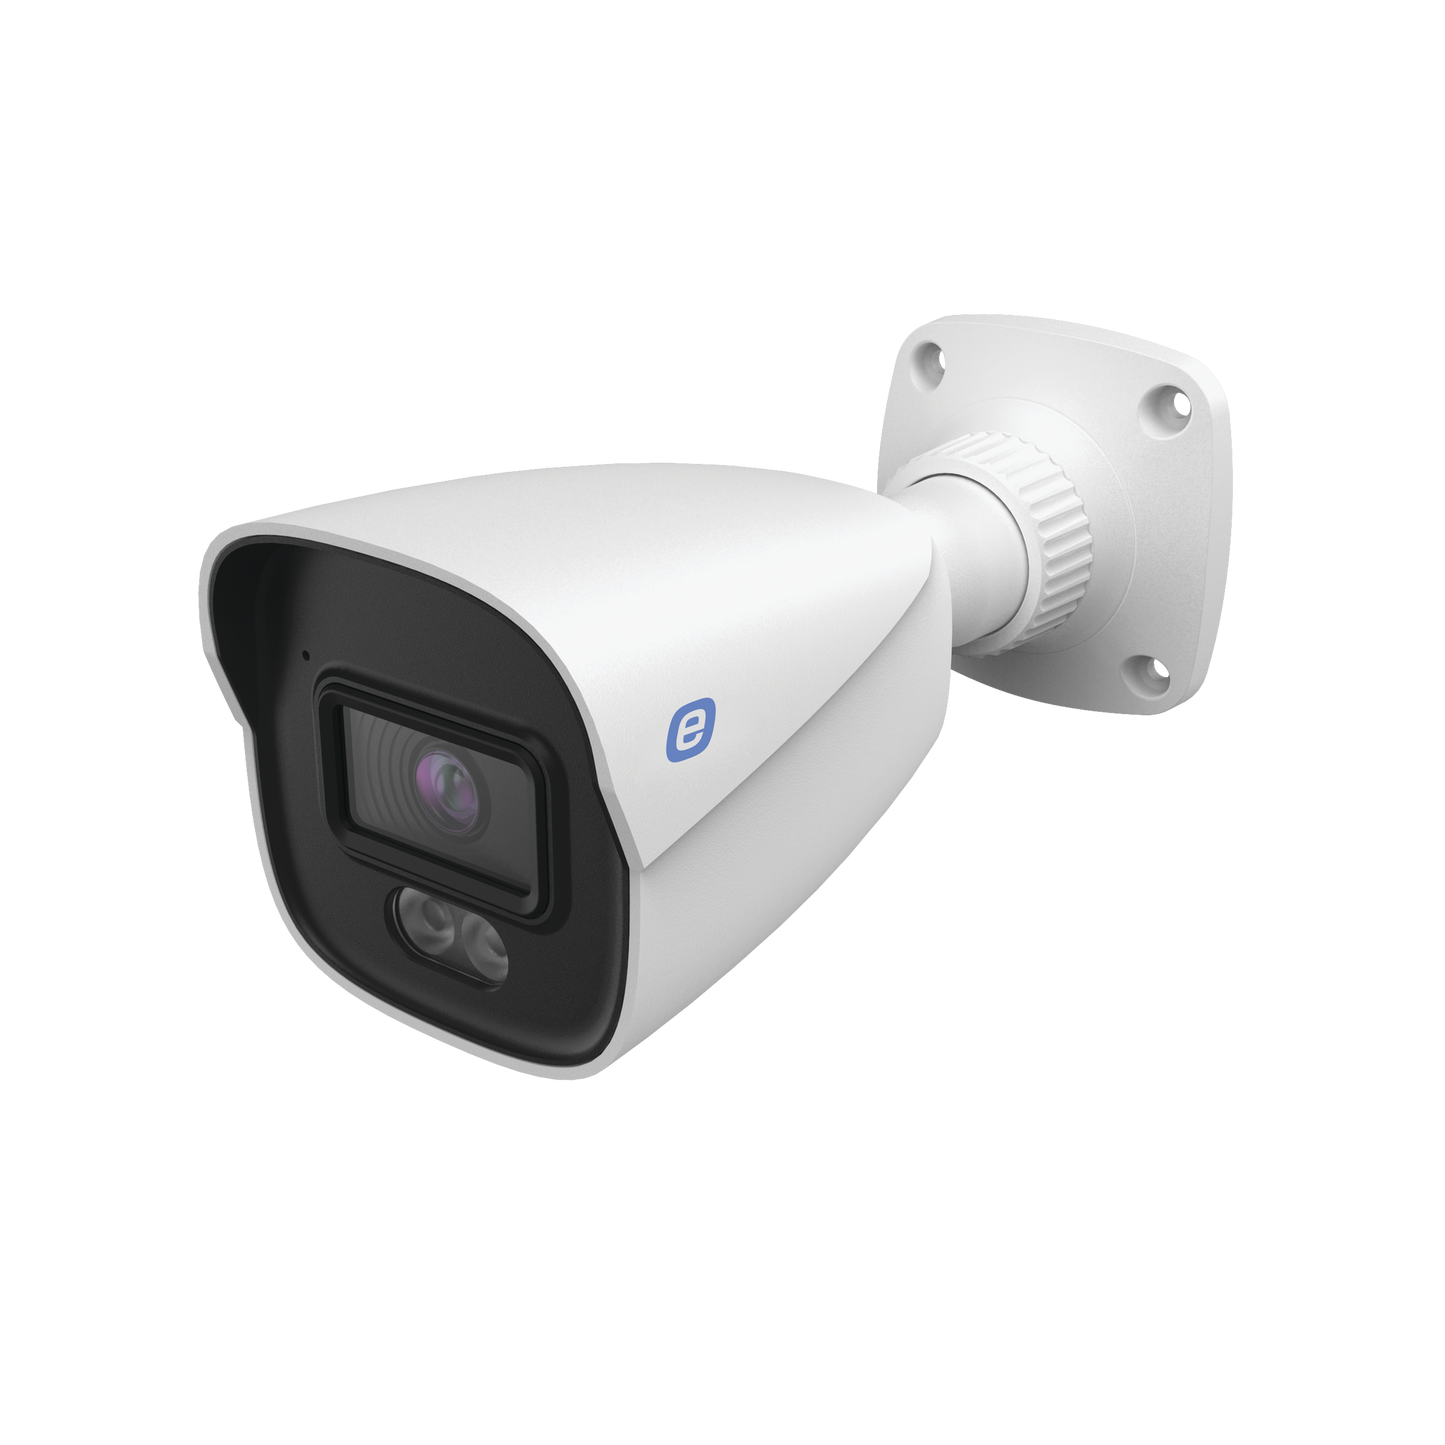 Bullet IP 2MP / 24/7 Color Image / POE / White Light 98ft (30m) / WDR / Micro SD / IP67 / 2.8 mm Lens / Built-In Microphone / Cloud Video Recording / Metal Housing